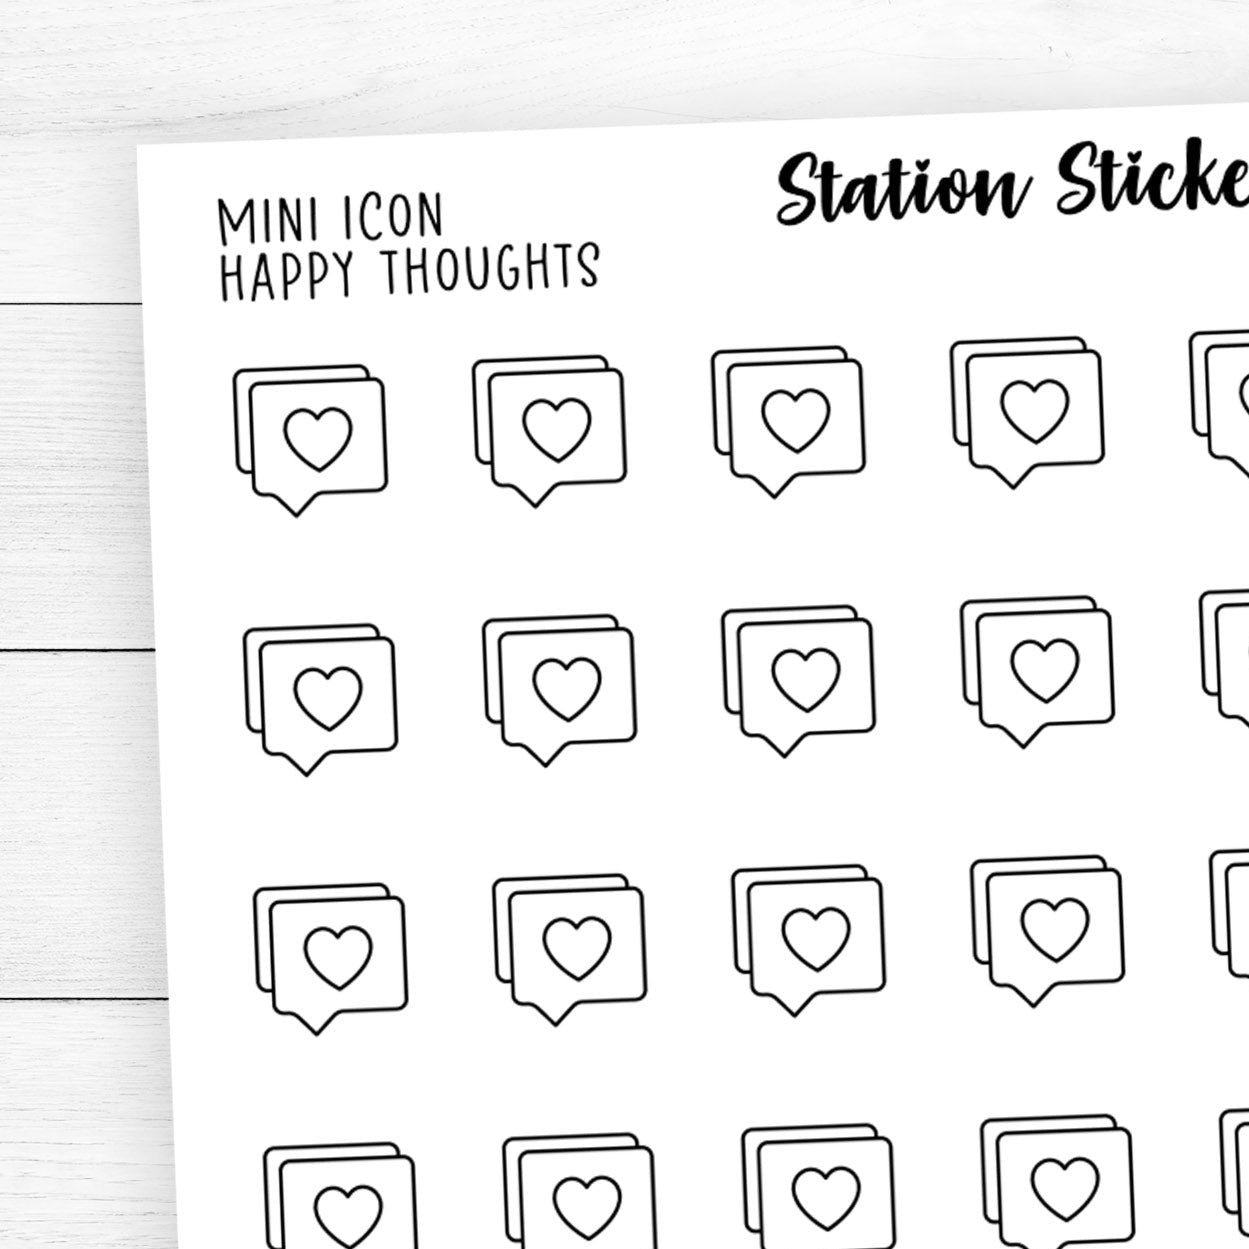 Happy Thoughts Mini Icon Stickers